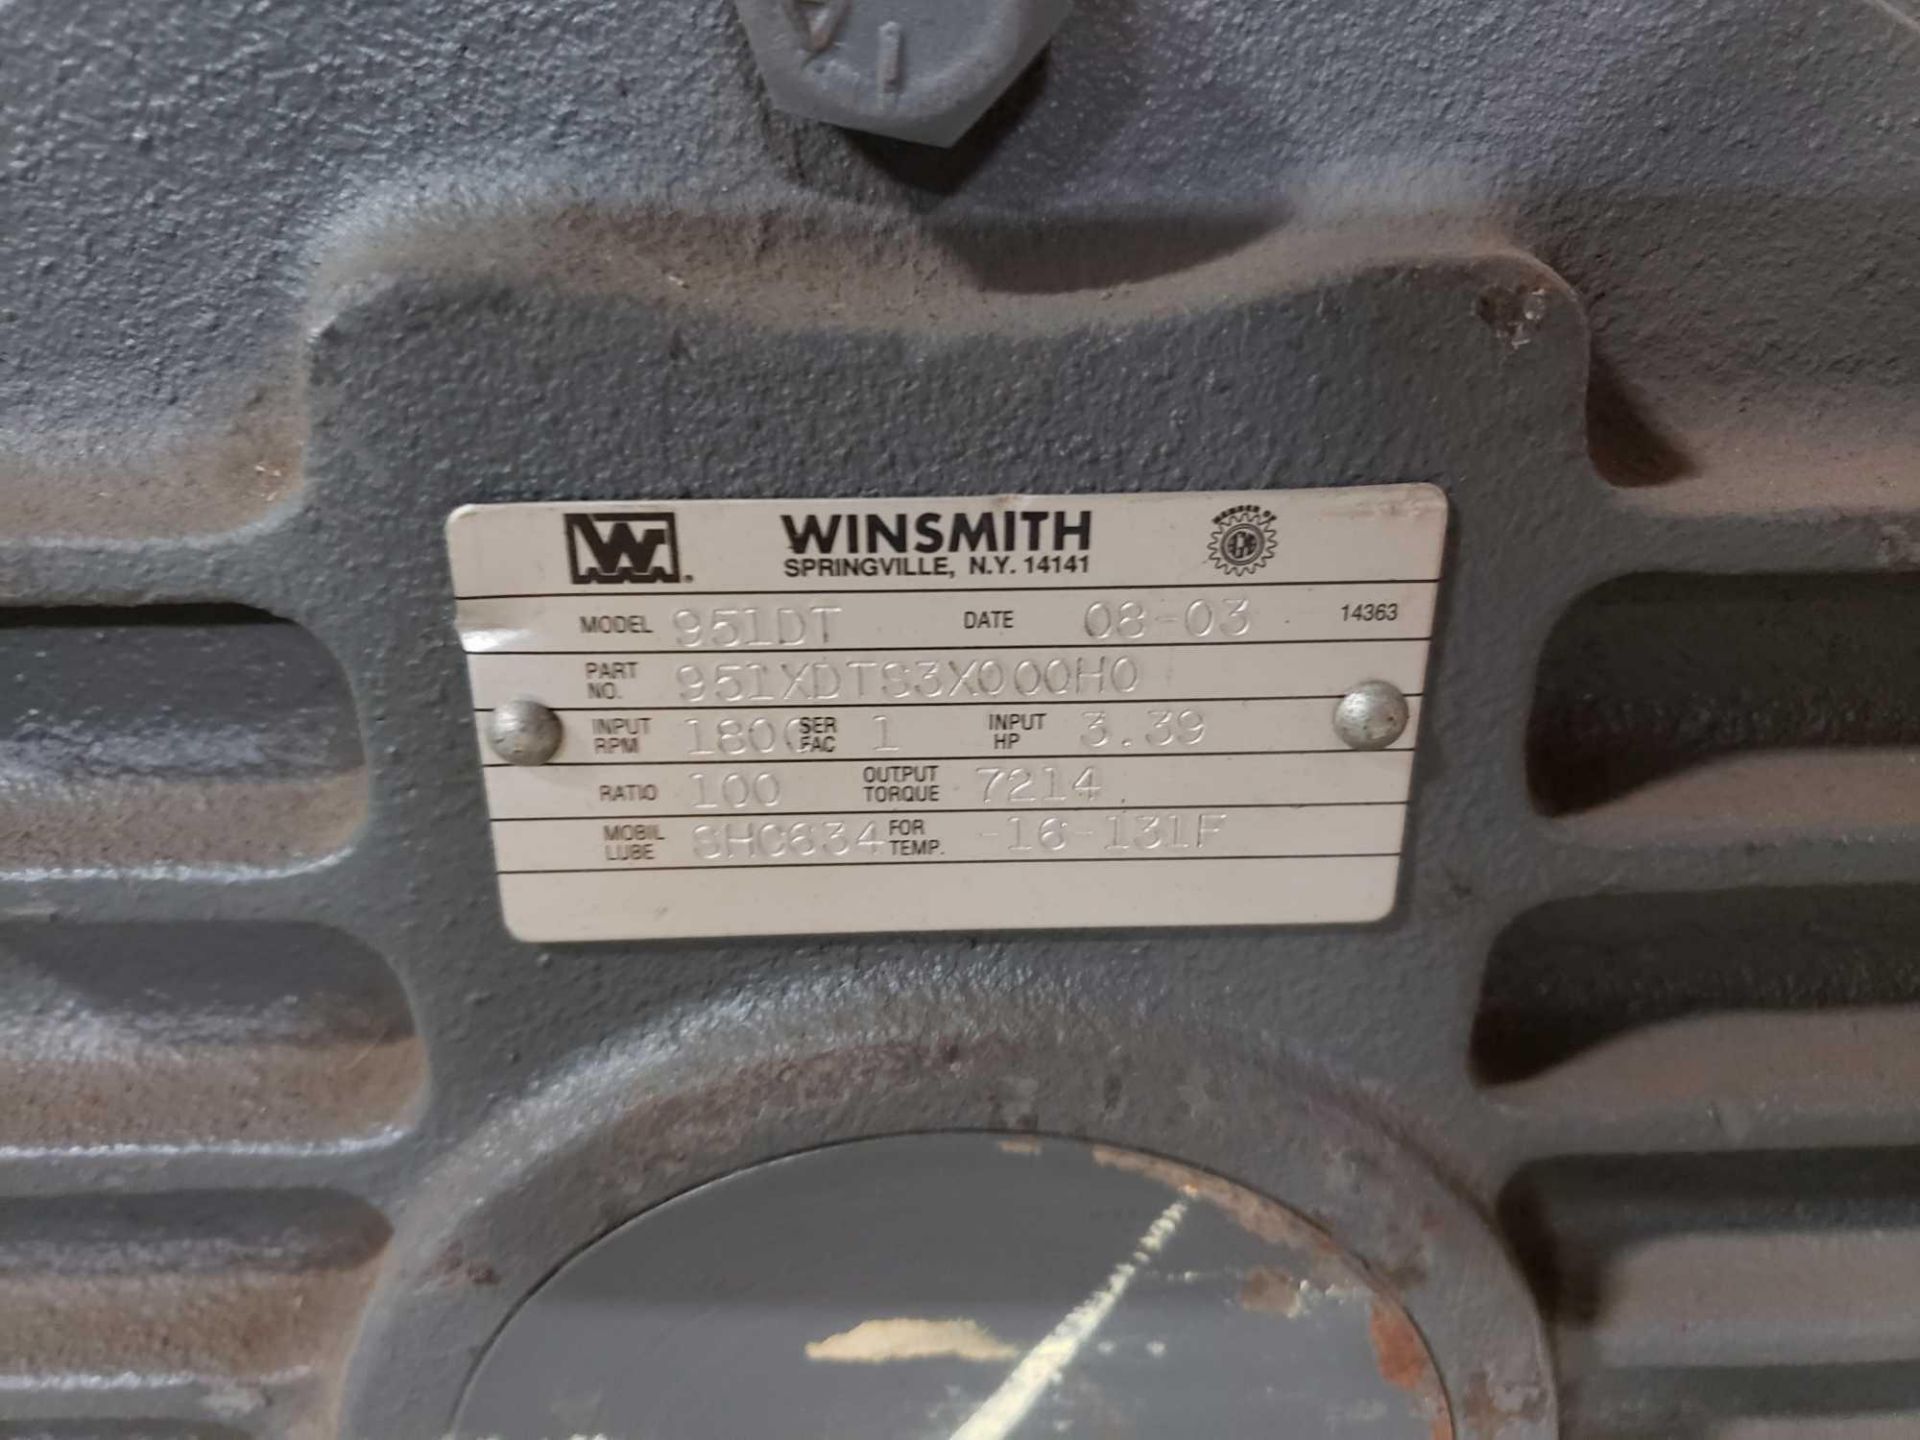 Winsmith speed reducer gear box model 951DT, ratio 100:1. New with shelf wear. - Image 2 of 3